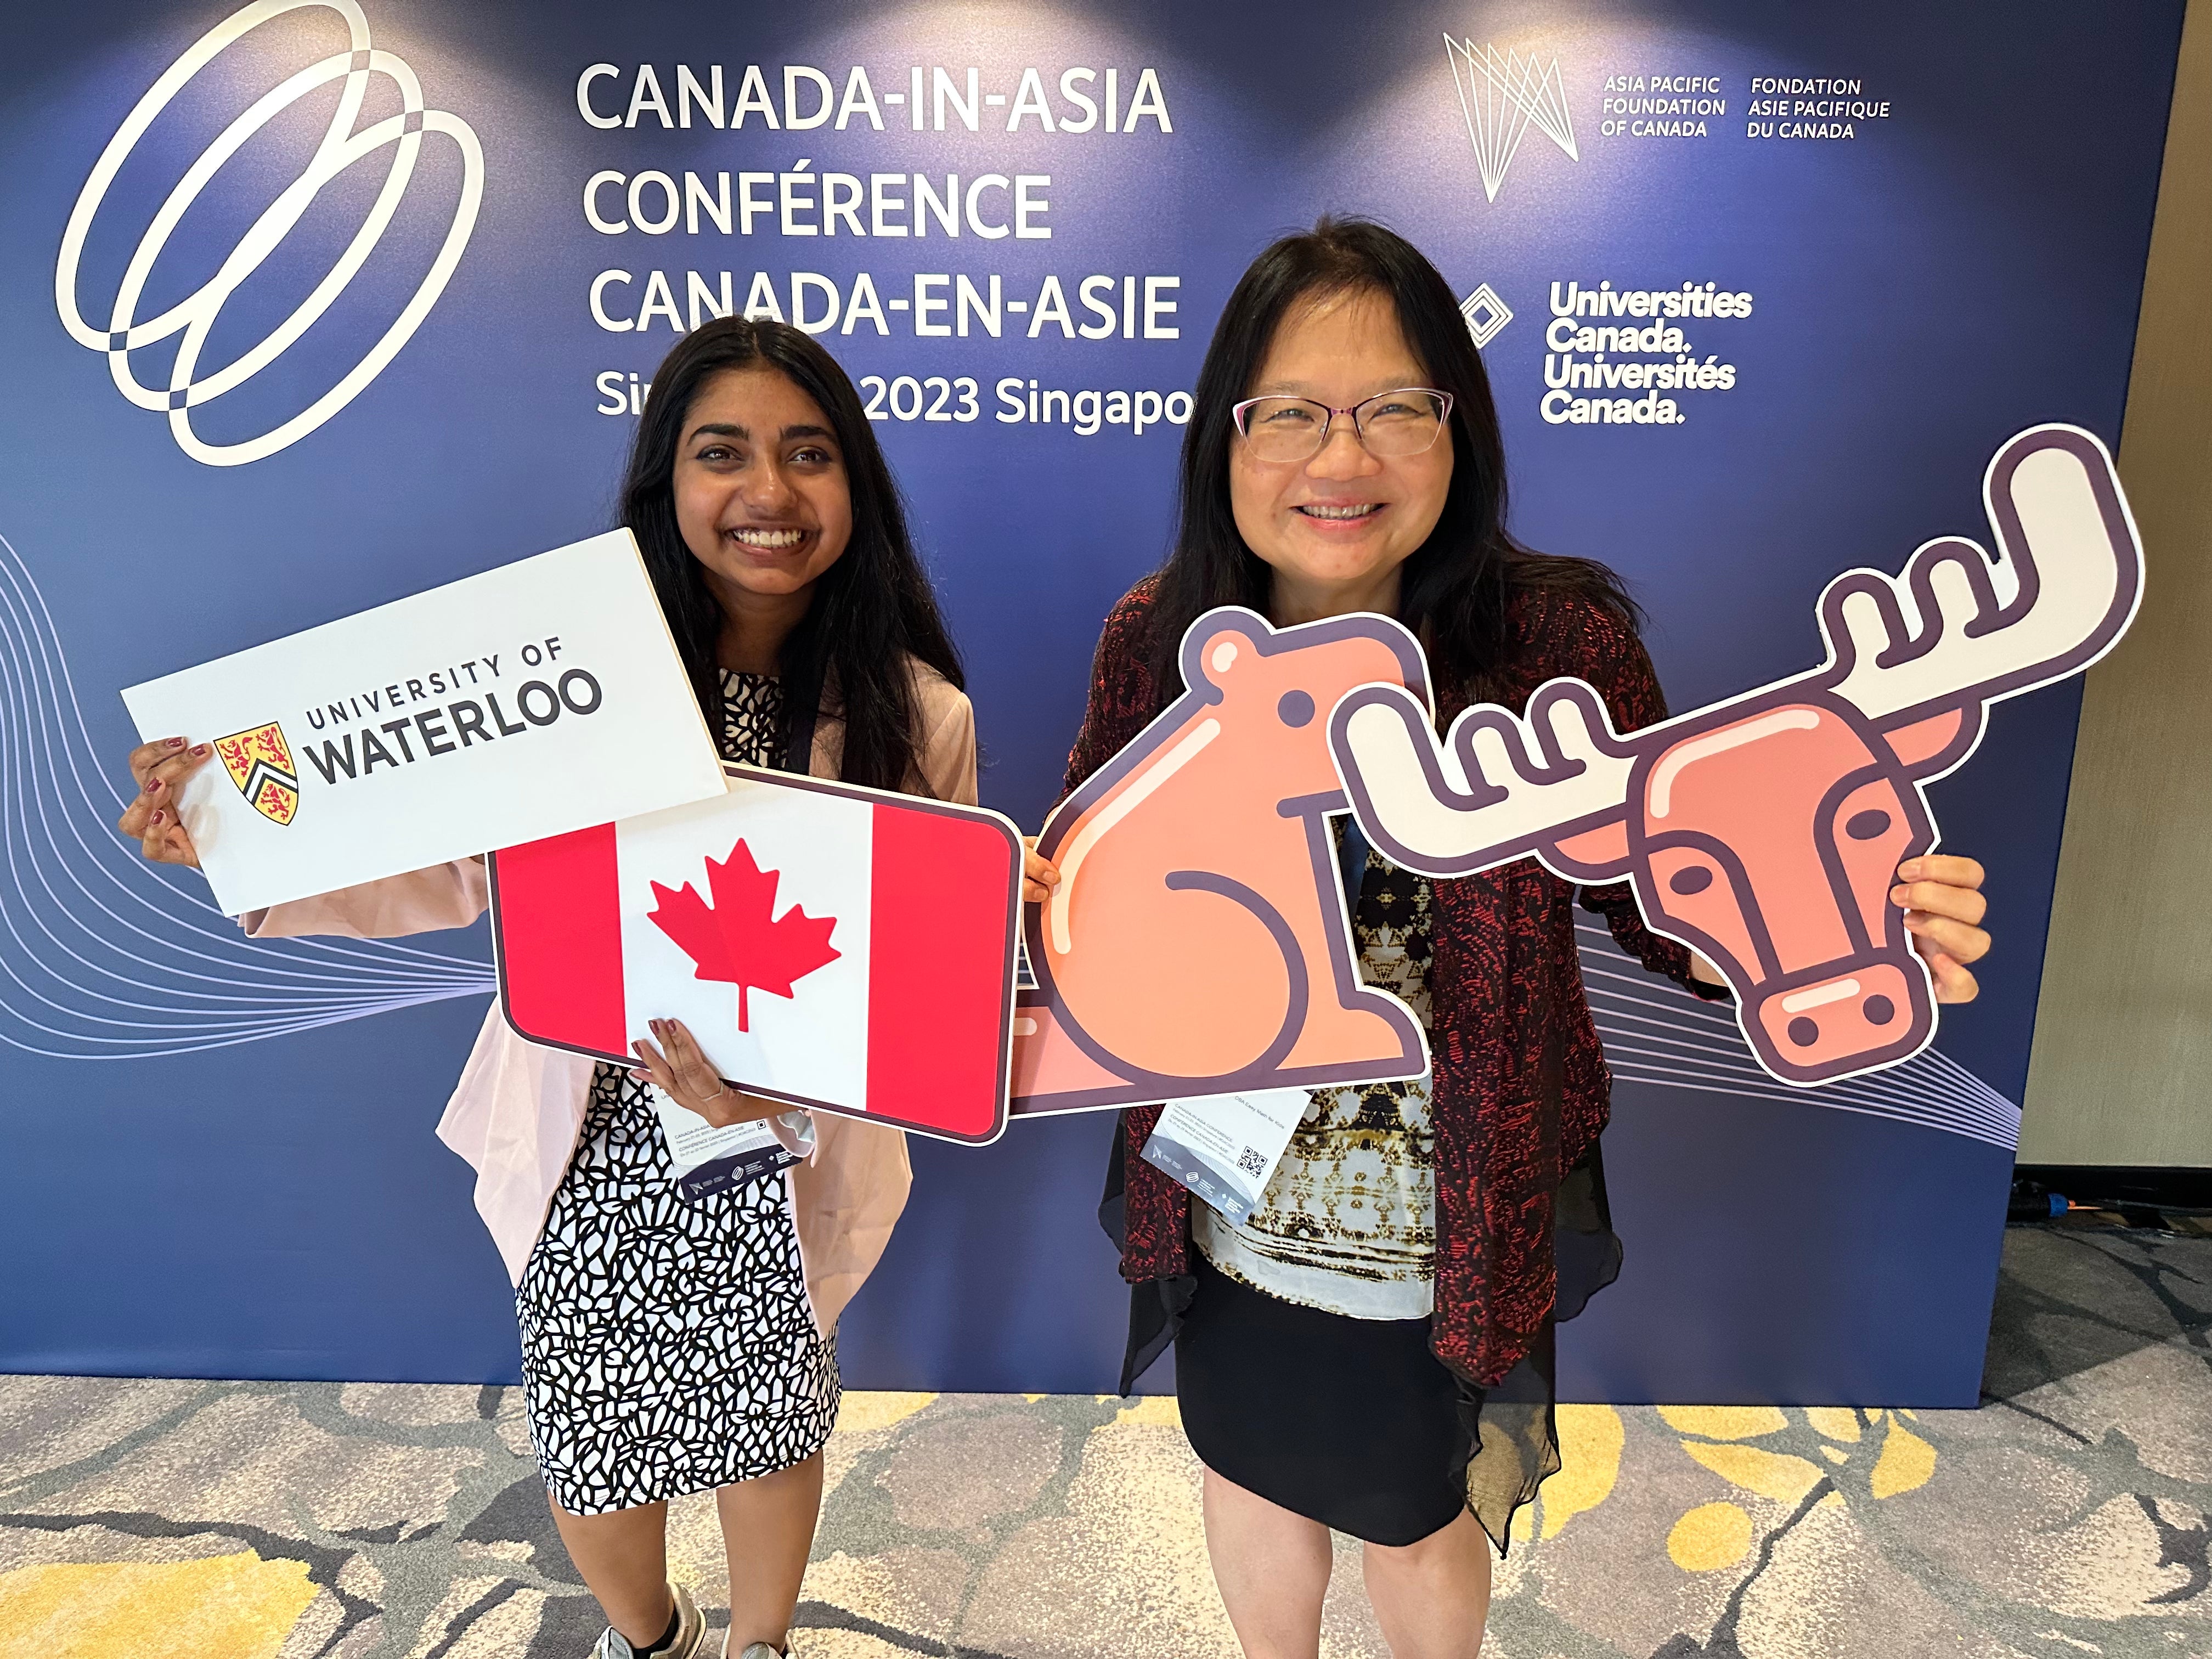 Feb 2023, Canada in Asia Conference in Singapore